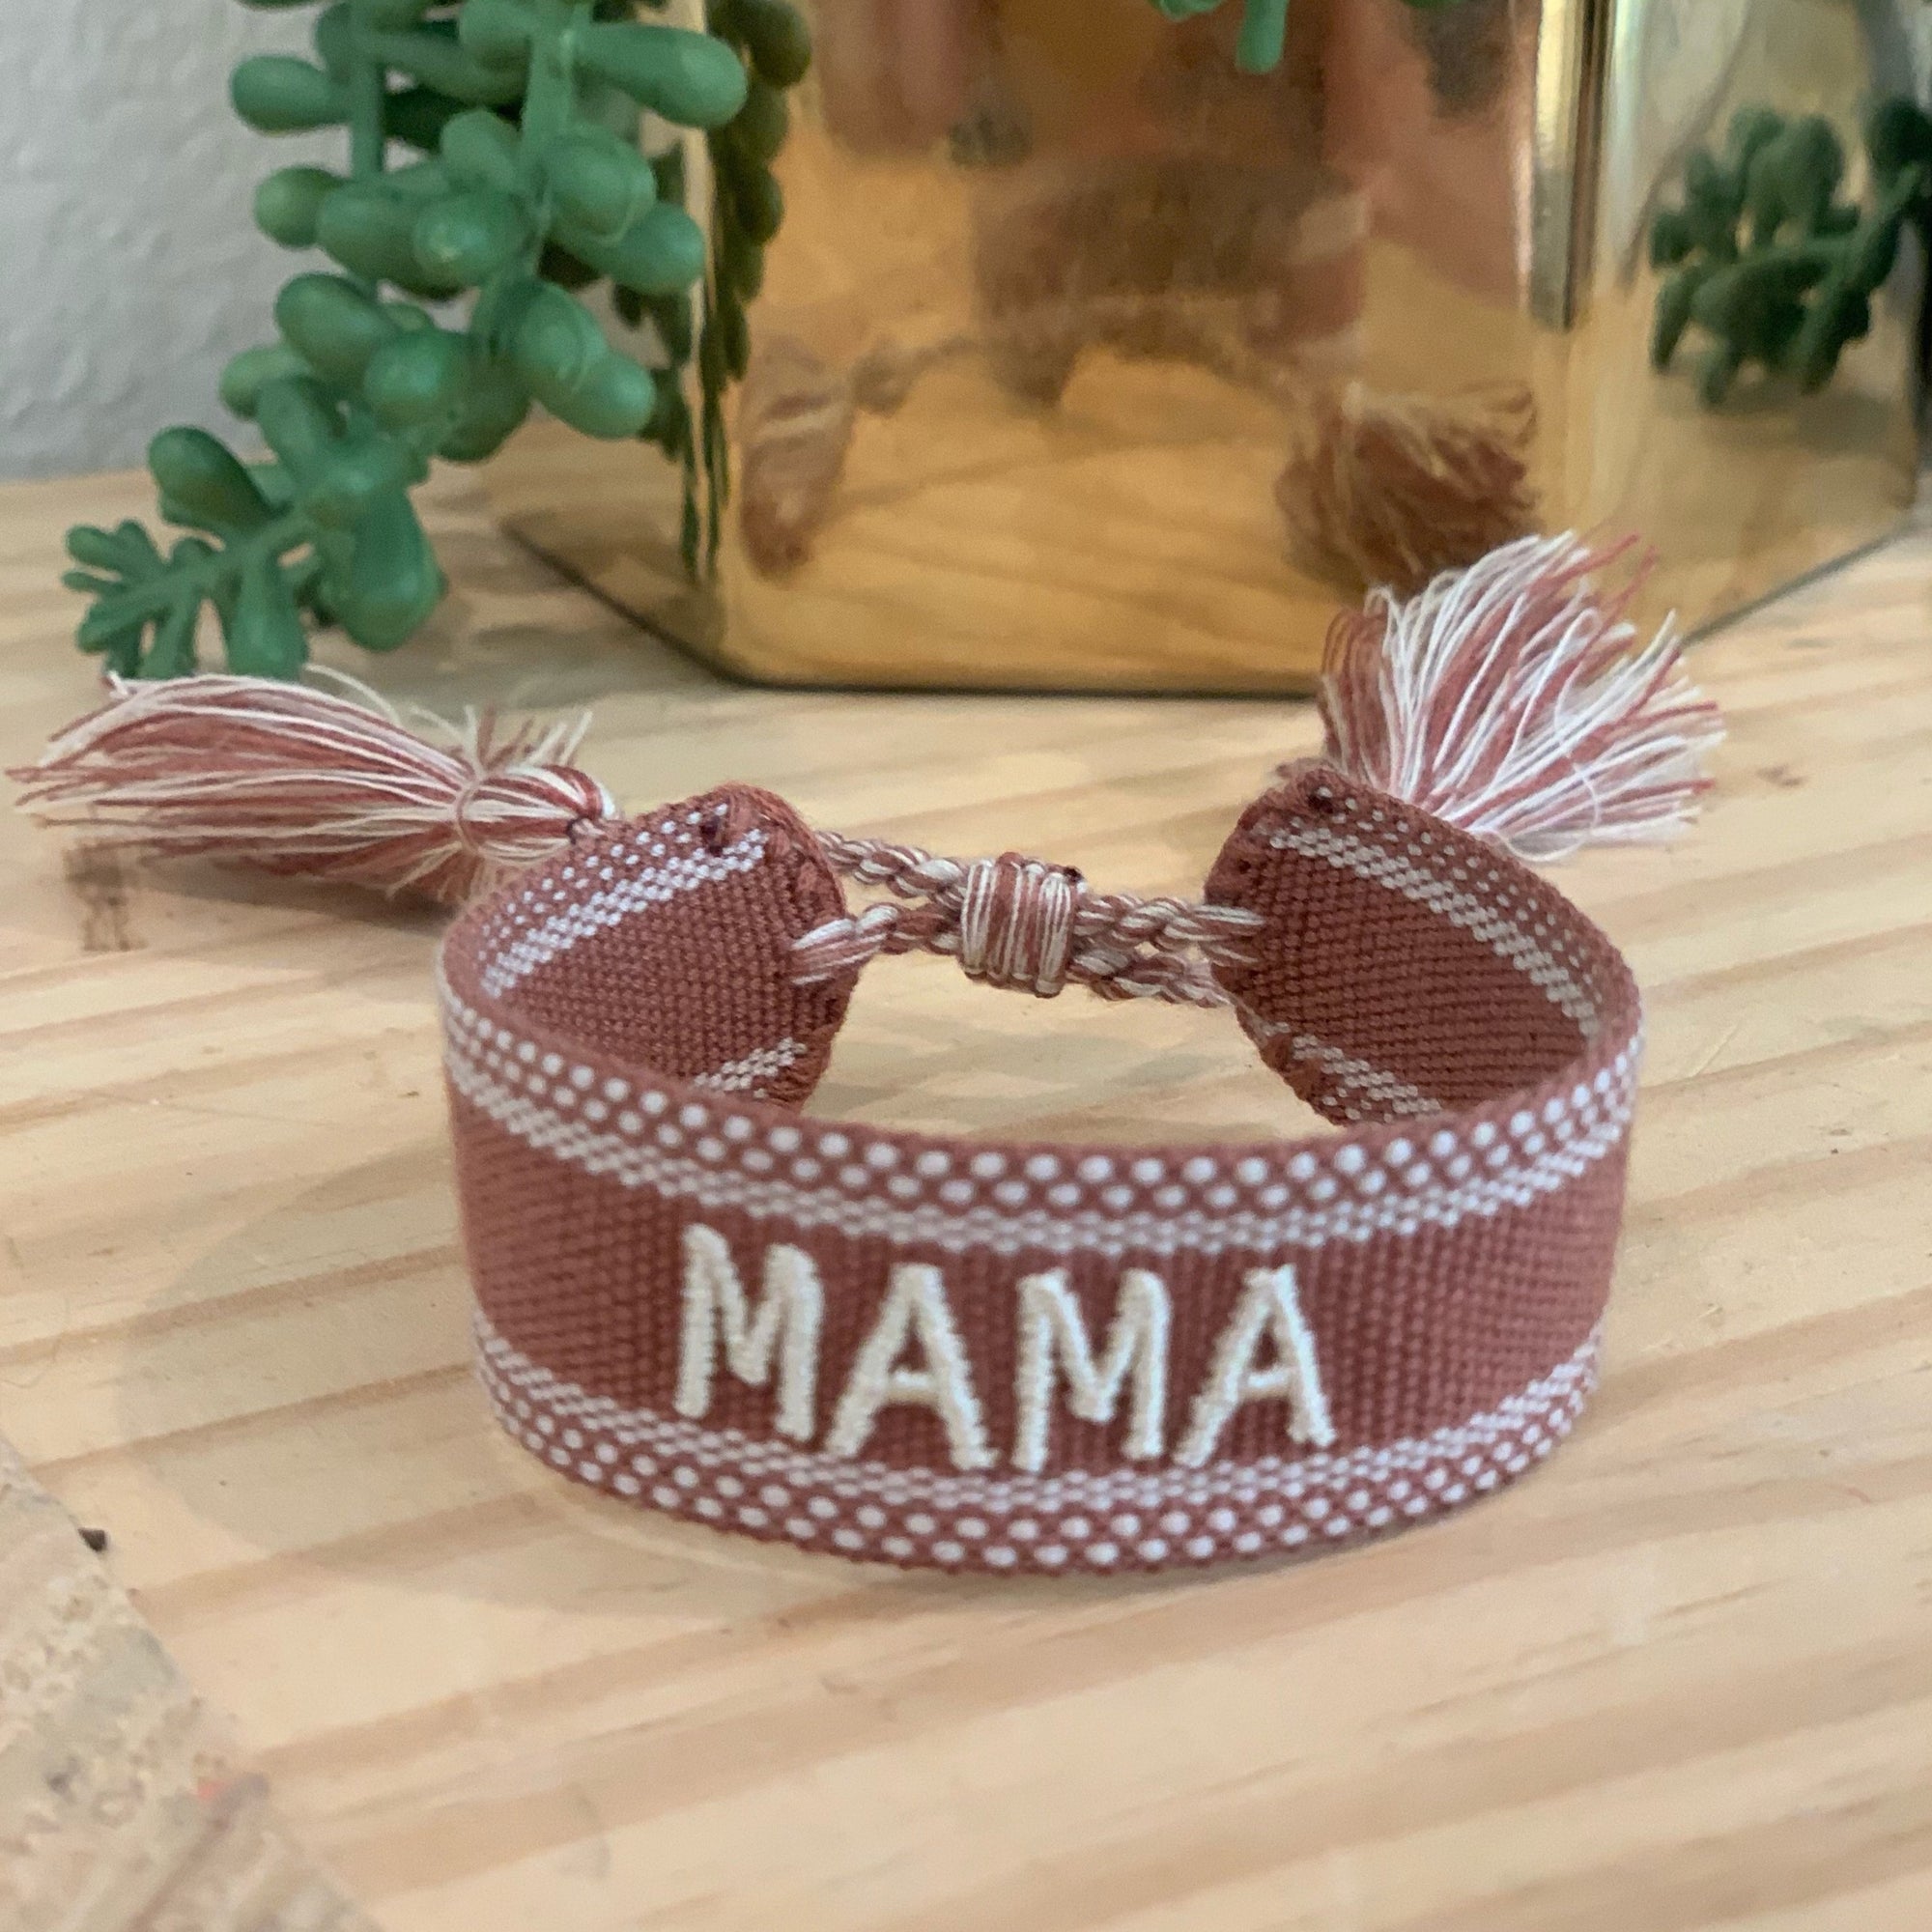 MAMA embroidered friendship bracelet in rust